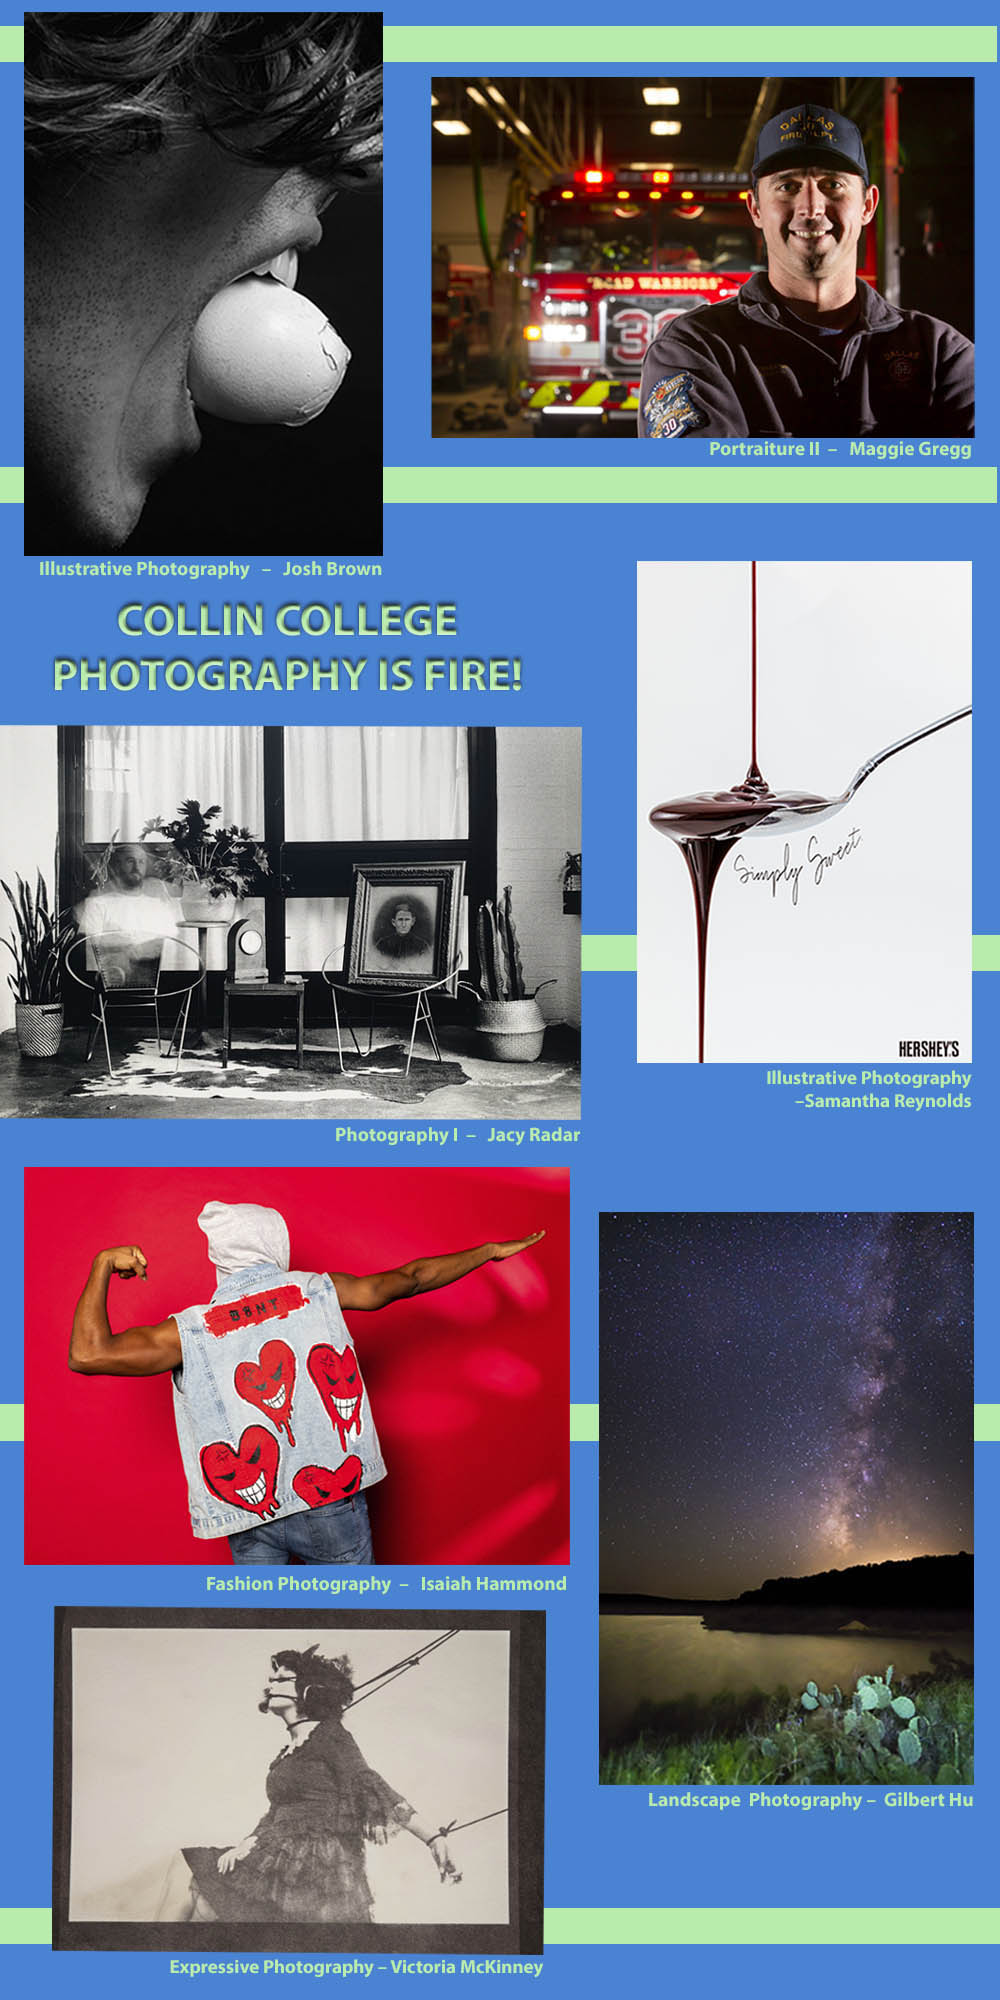 A sampling of Collin College photography students' work